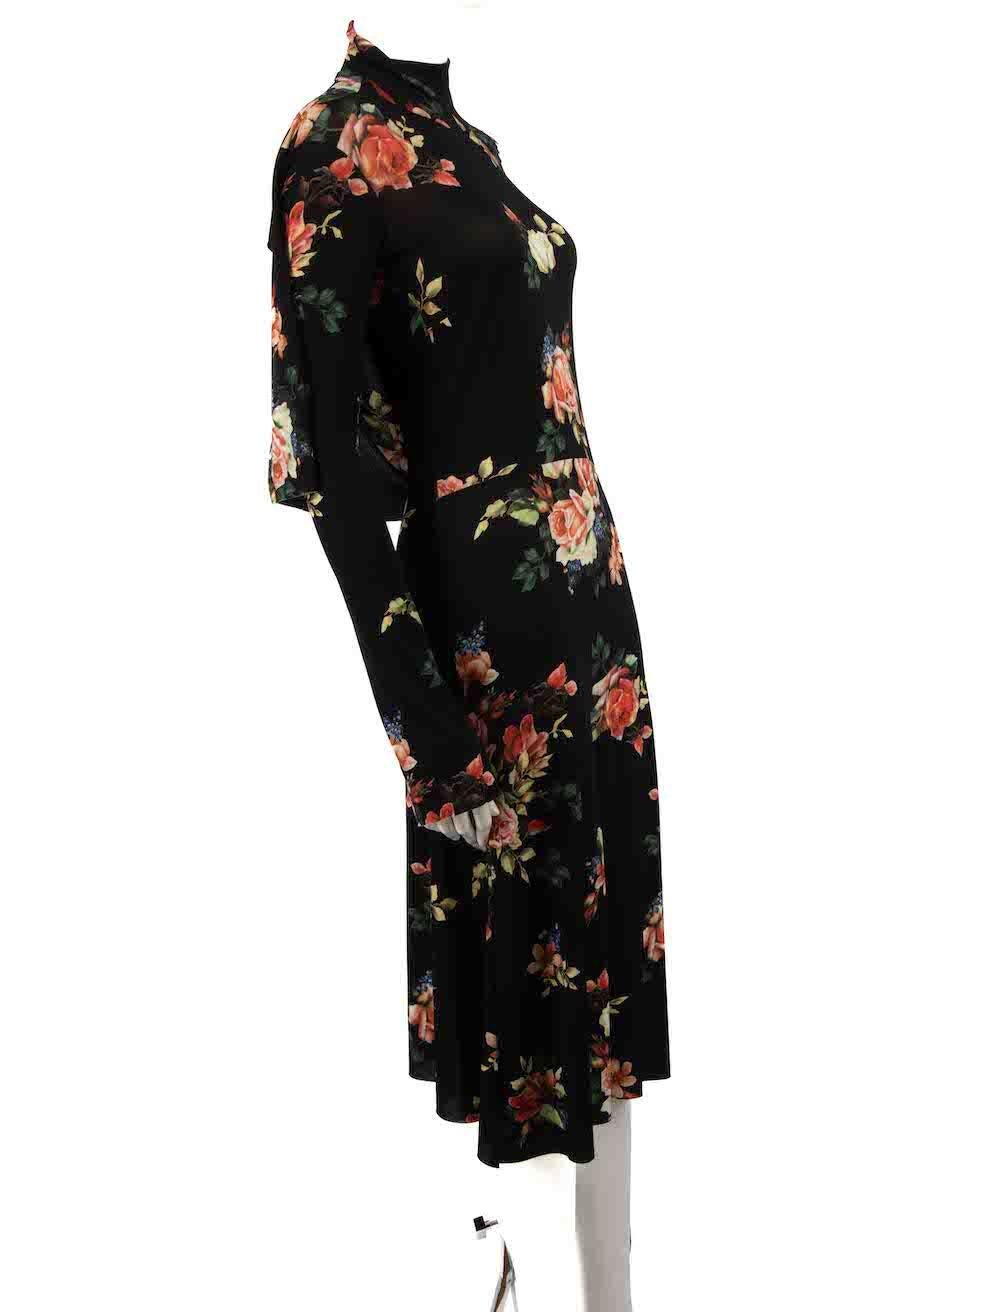 CONDITION is Very good. Hardly any visible wear to dress is evident on this used Vetements designer resale item.
 
 Details
 Black
 Polyester
 Dress
 Floral print
 Open back
 Long sleeves
 Mock neck
 Neck and side zip fastening
 Draped panel
 Midi
